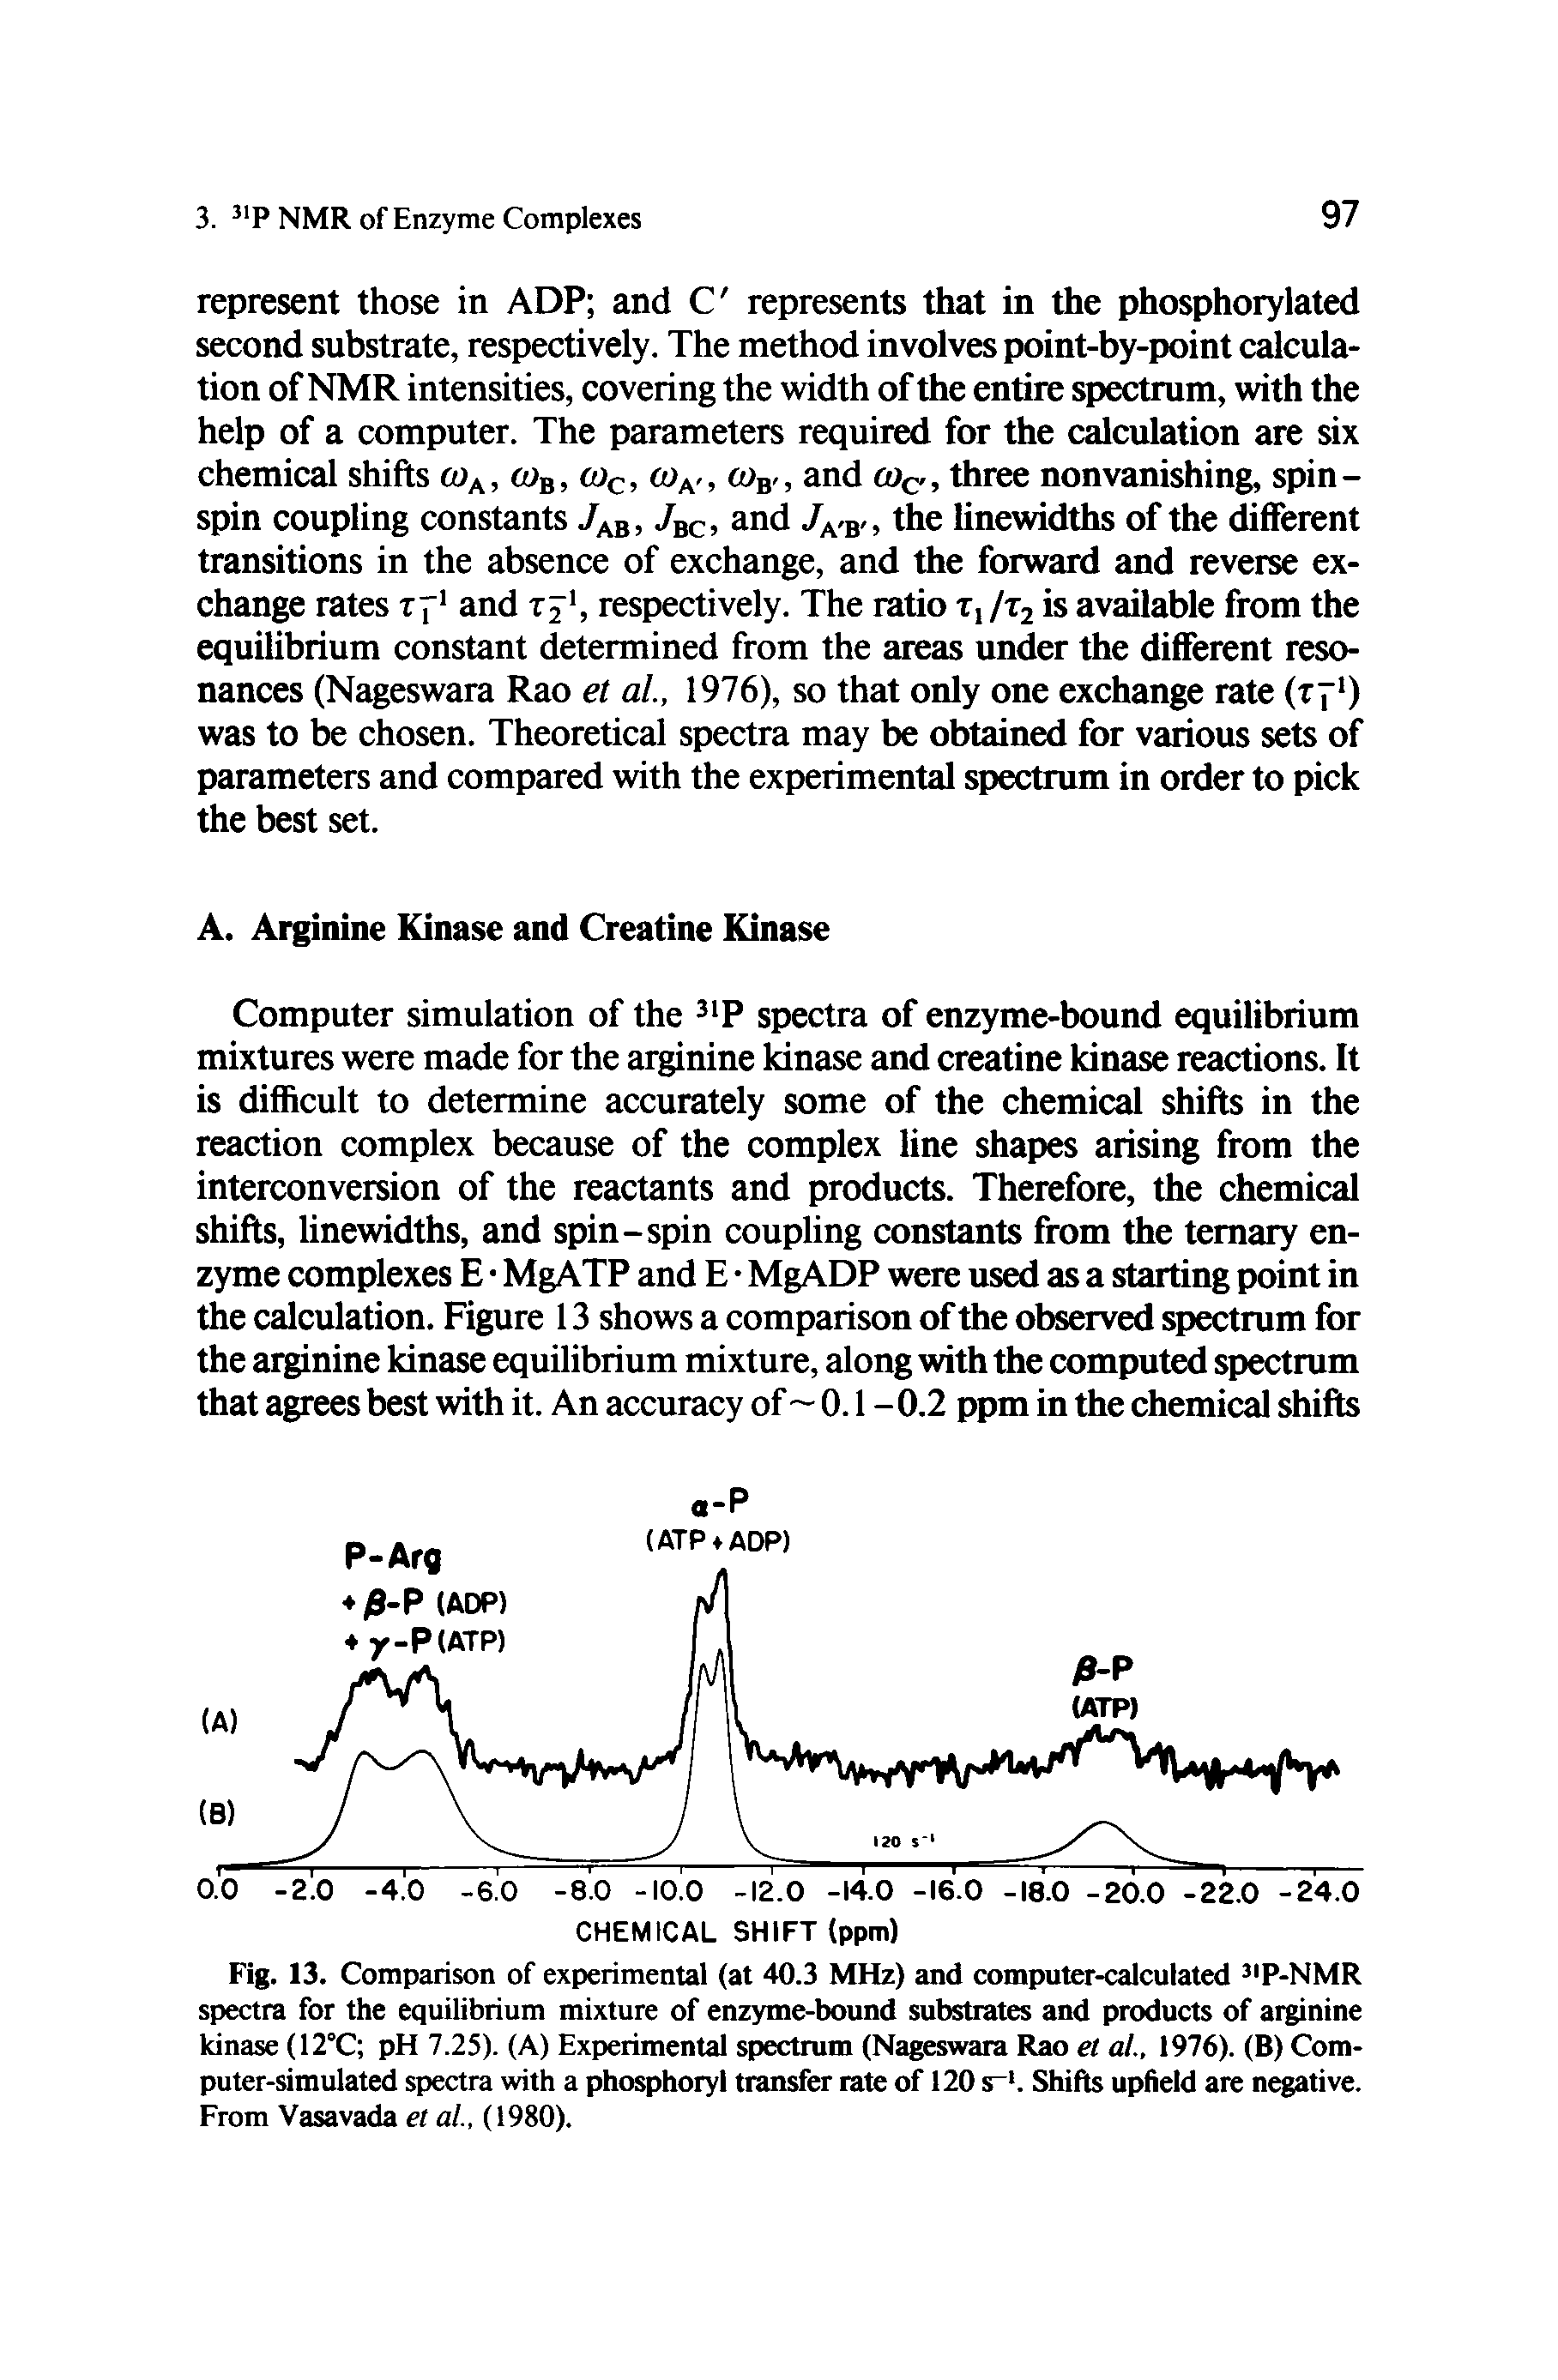 Fig. 13. Comparison of experimental (at 40.3 MHz) and computer-calculated P-NMR spectra for the equilibrium mixture of enzyme-bound substrates and products of arginine kinase (12 C pH 7.25). (A) Experimental spectrum (Nageswara Rao et al., 1976). (B) Computer-simulated spectra with a phosphoryl transfer rate of 120 s >. Shifts upheld are negative. From Vasavada et al., (1980).